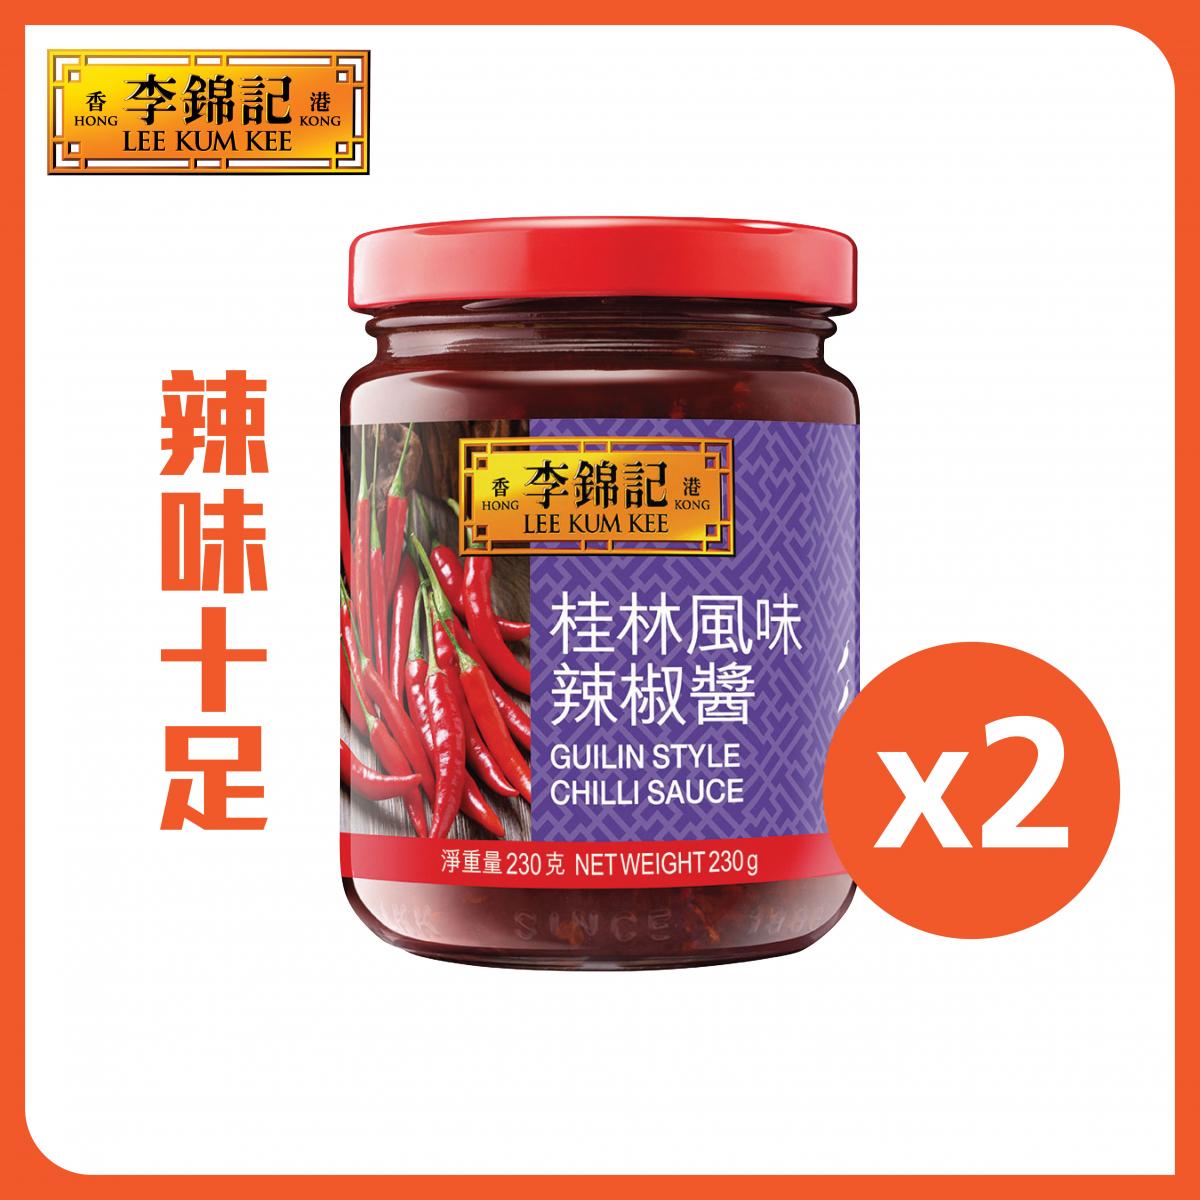 Guilin Style Chili Sauce